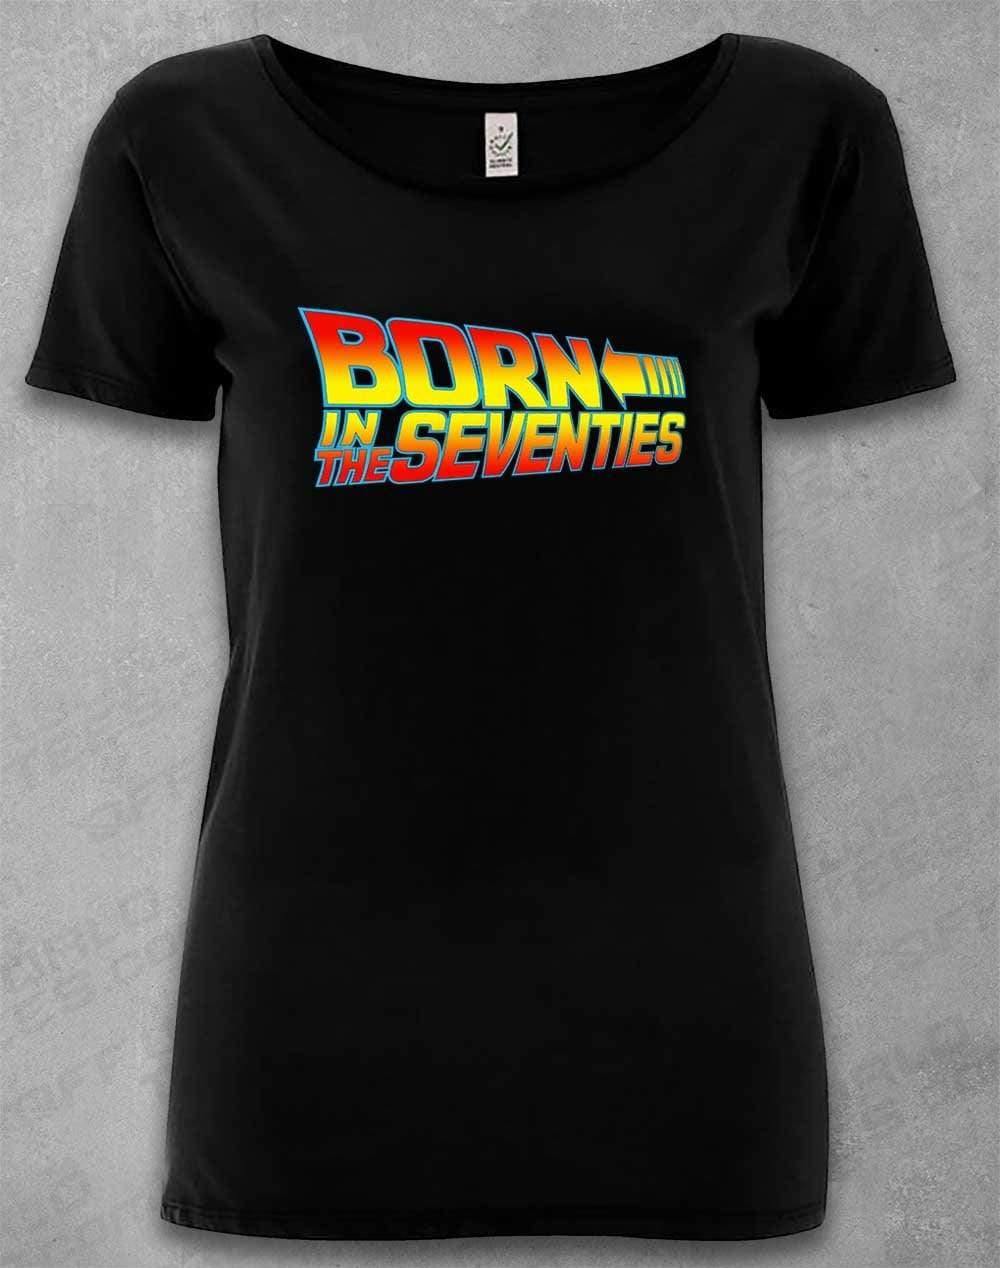 DELUXE Born in the... (CHOOSE YOUR DECADE!) Organic Scoop Neck T-Shirt 1970s - Black / 8-10  - Off World Tees